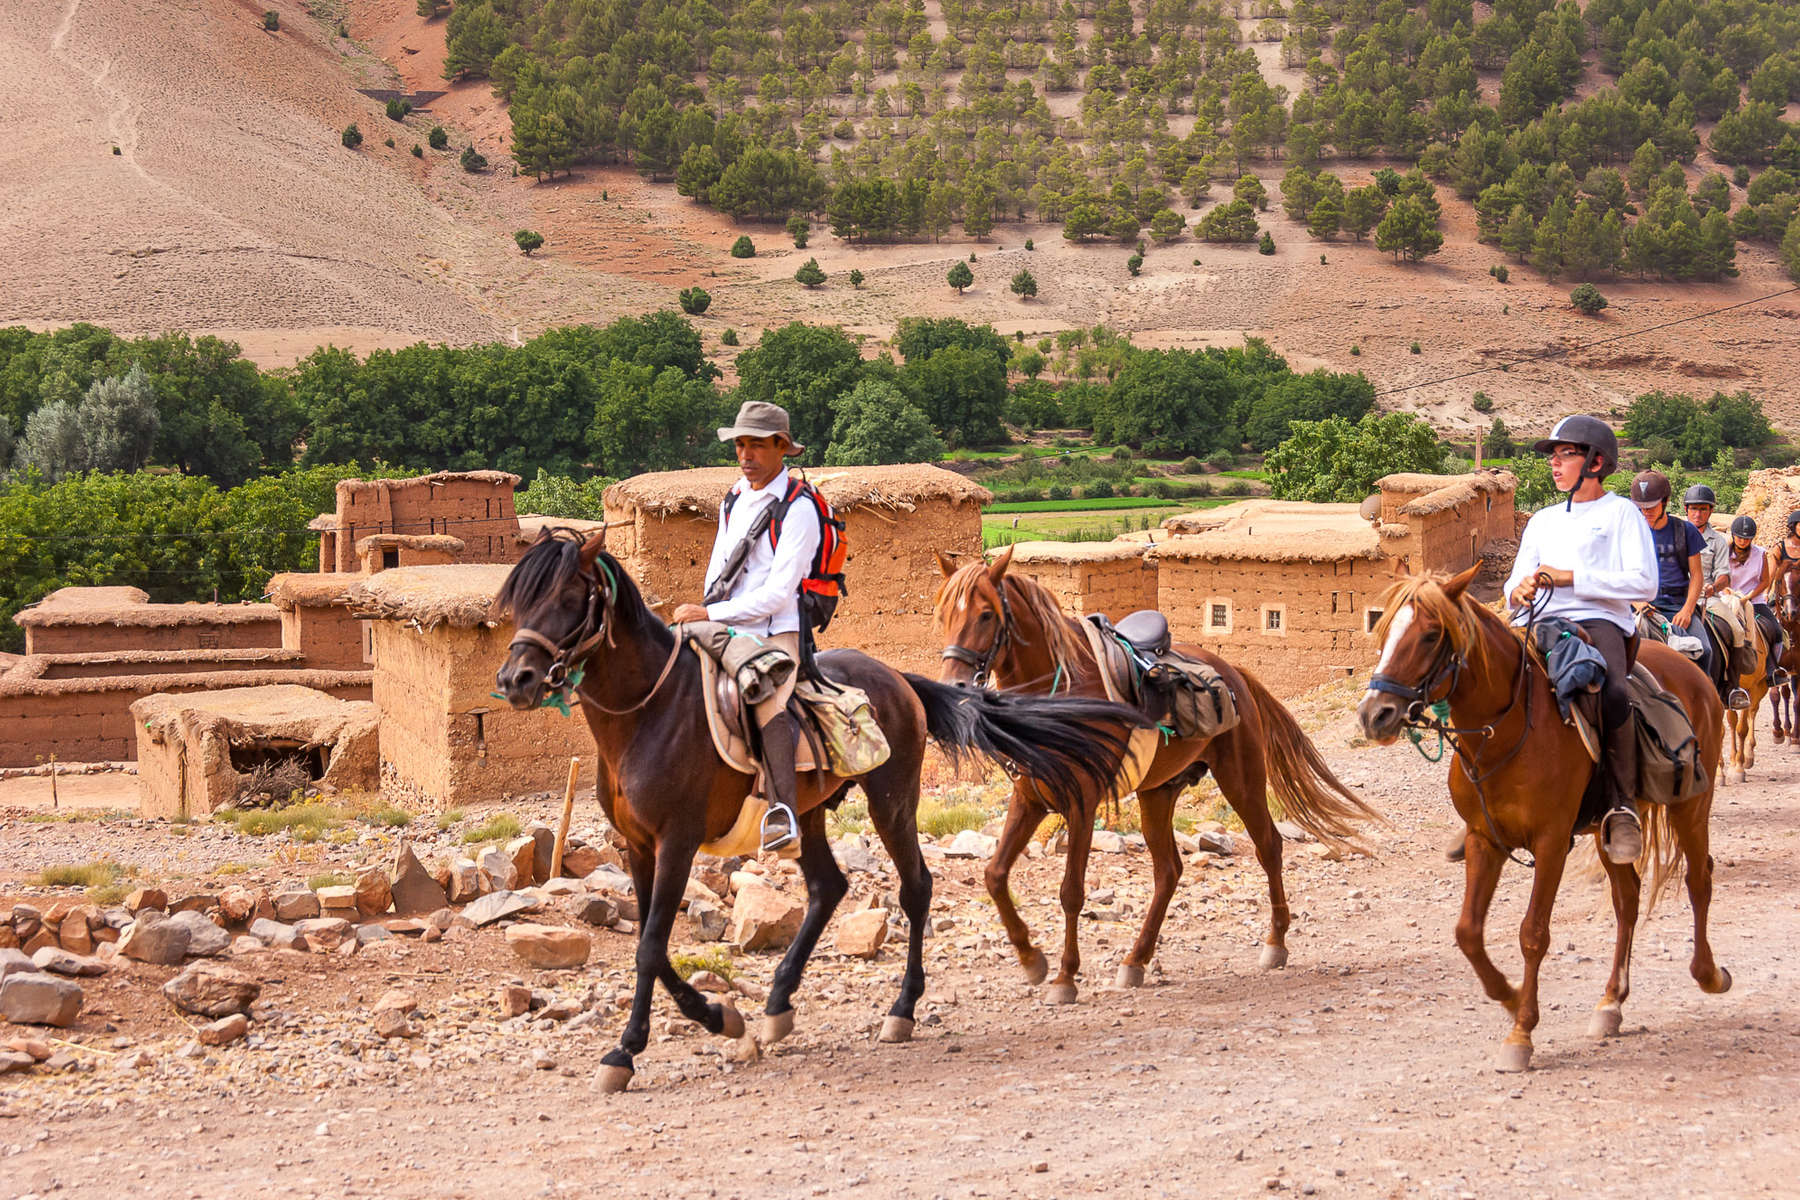 Riders riding across a traditional village in Morocco